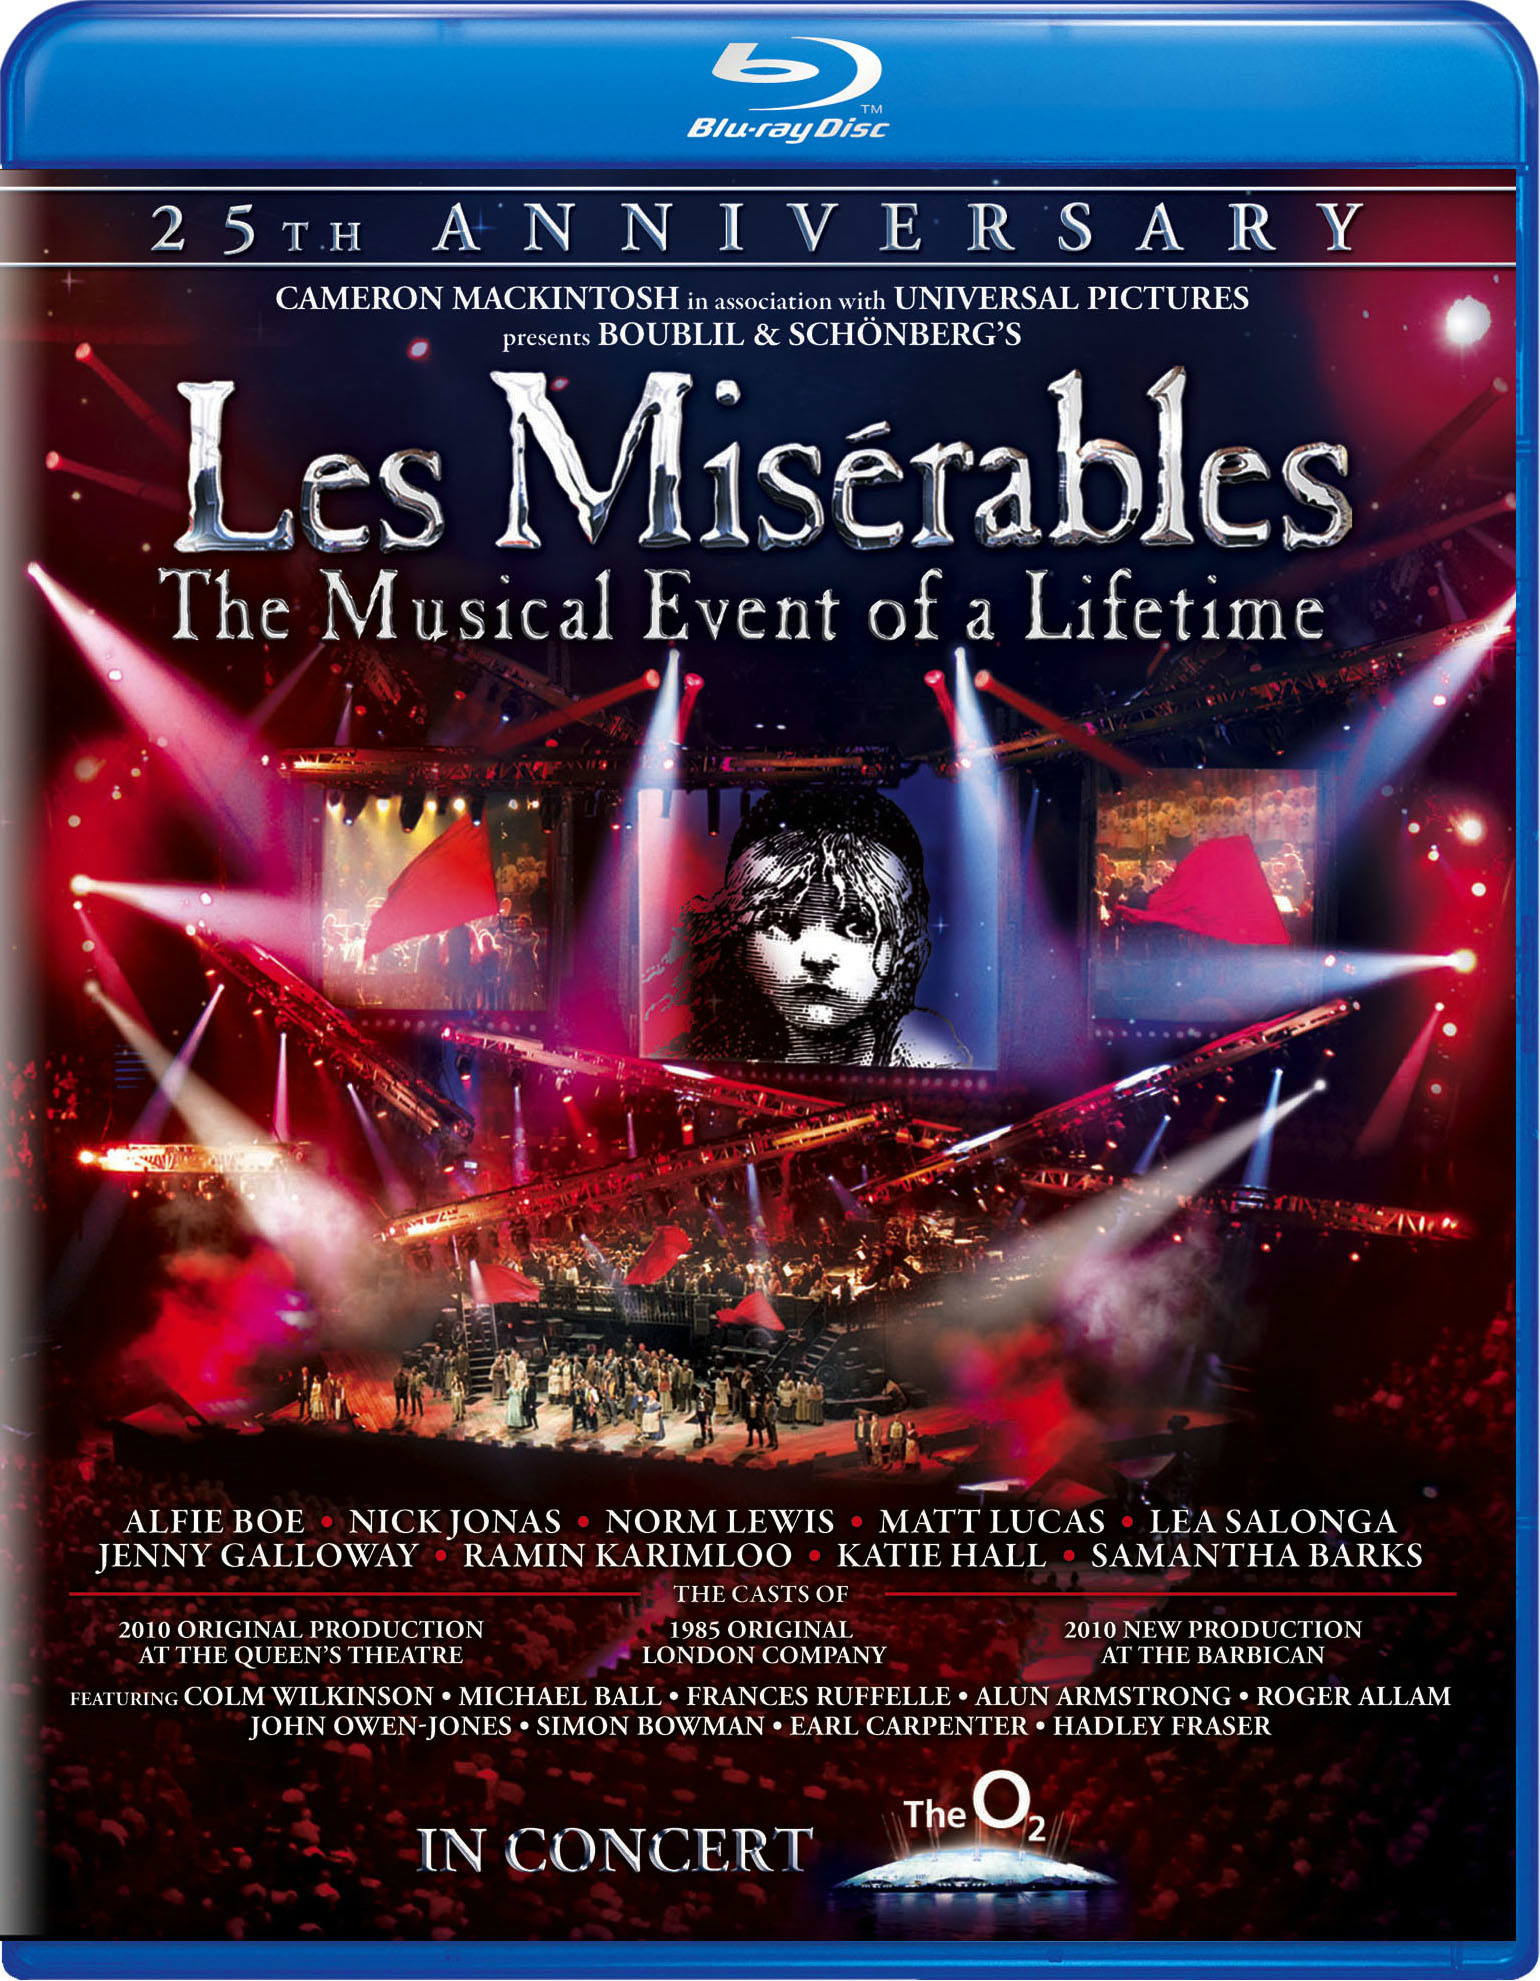 Les Misérables: In Concert - 25th Anniversary Show (25th Anniversary Edition) - Blu-ray [ 2010 ]  - Stage Musicals Music On Blu-ray